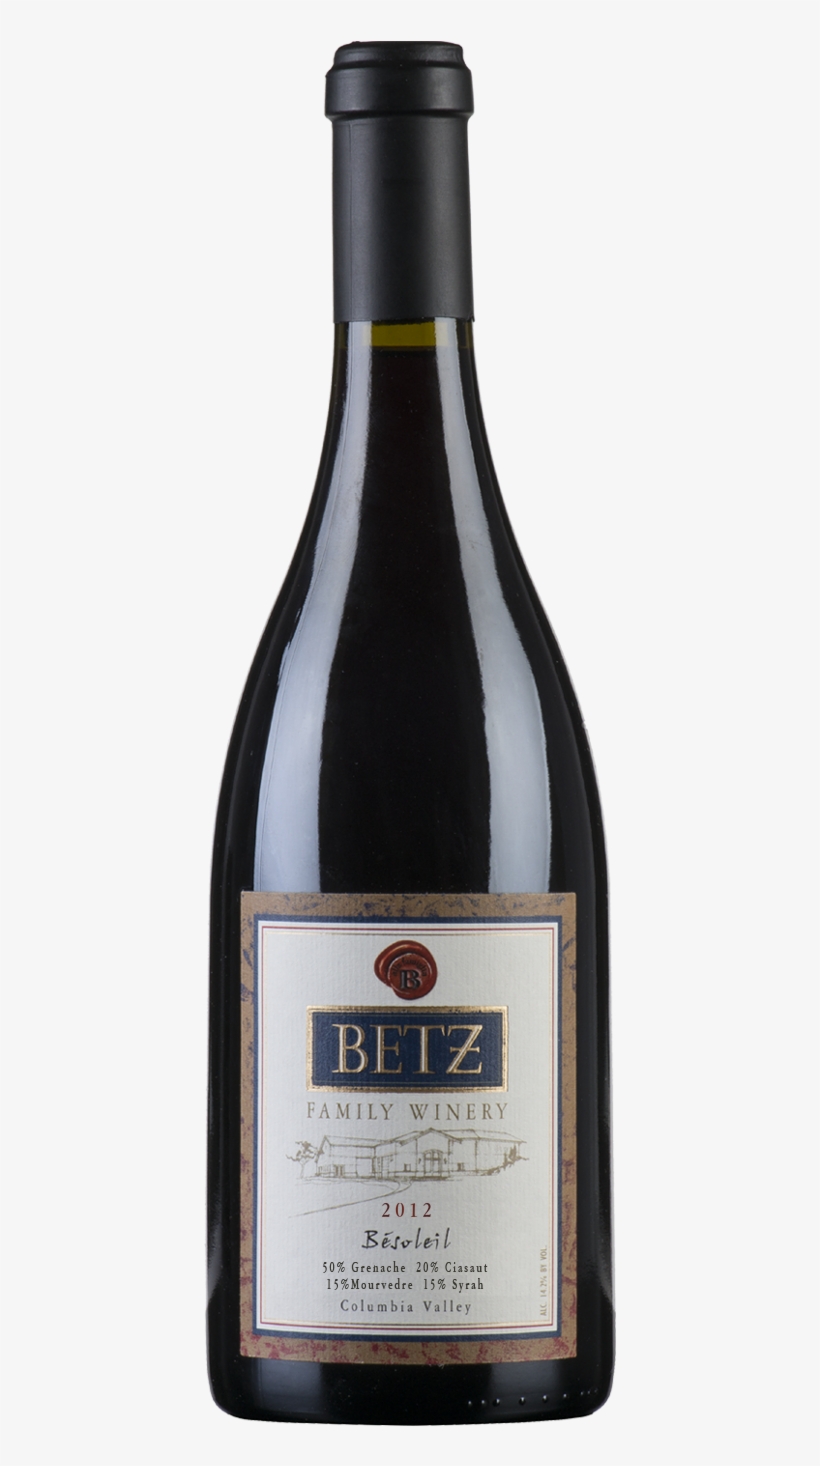 Bottle Shot - Betz Family Winery Besoleil Rhone Blend Columbia Valley, transparent png #8675985